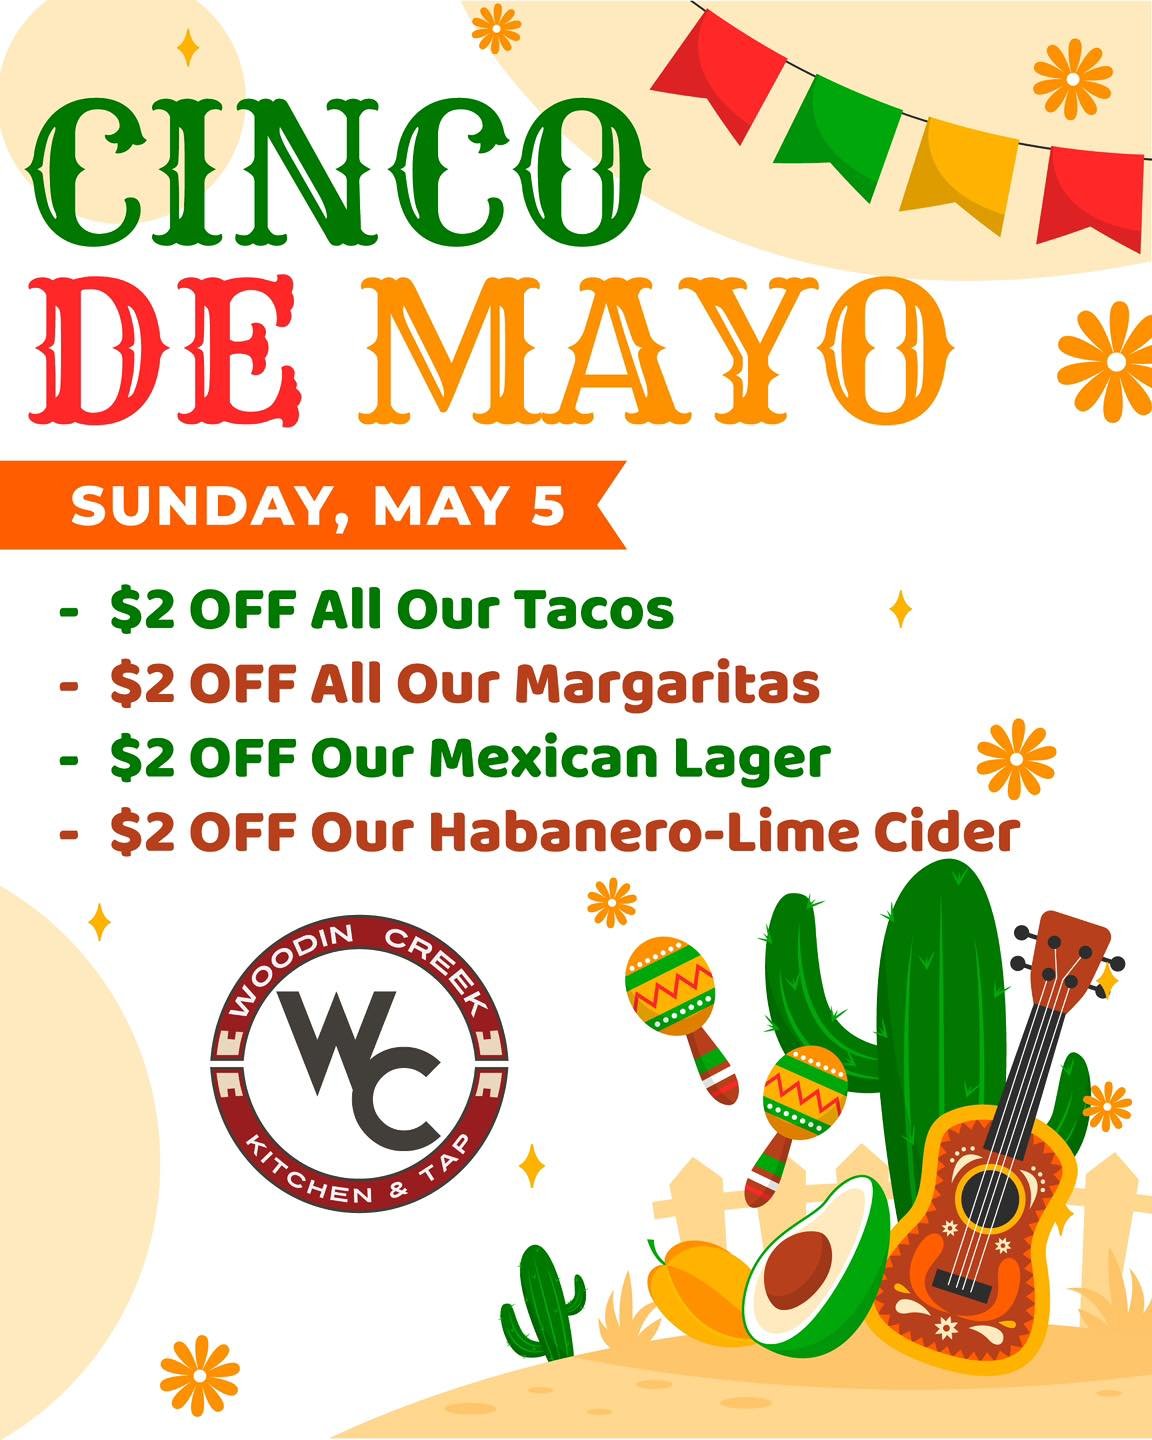 Come down and enjoy Cinco De Mayo with us all day! $2 off all of our Tacos, Margaritas, Kulshan Mexican Lager, and our Habanero Lime Cider by Channel Marker. 🌮🇲🇽